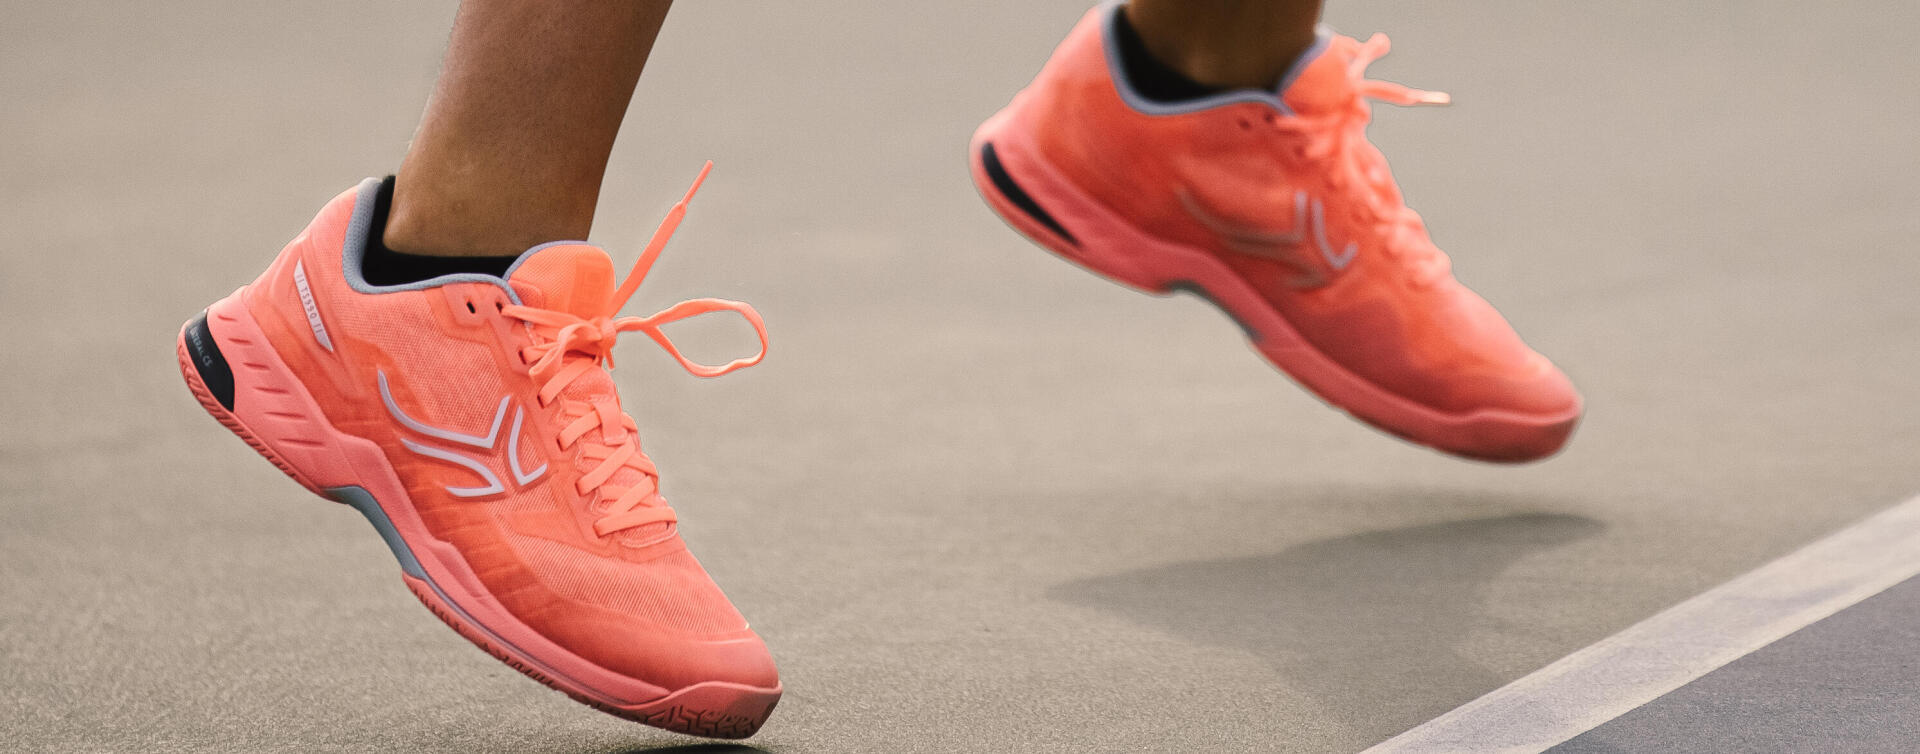 TENNIS DRILLS: IMPROVING YOUR FOOTWORK